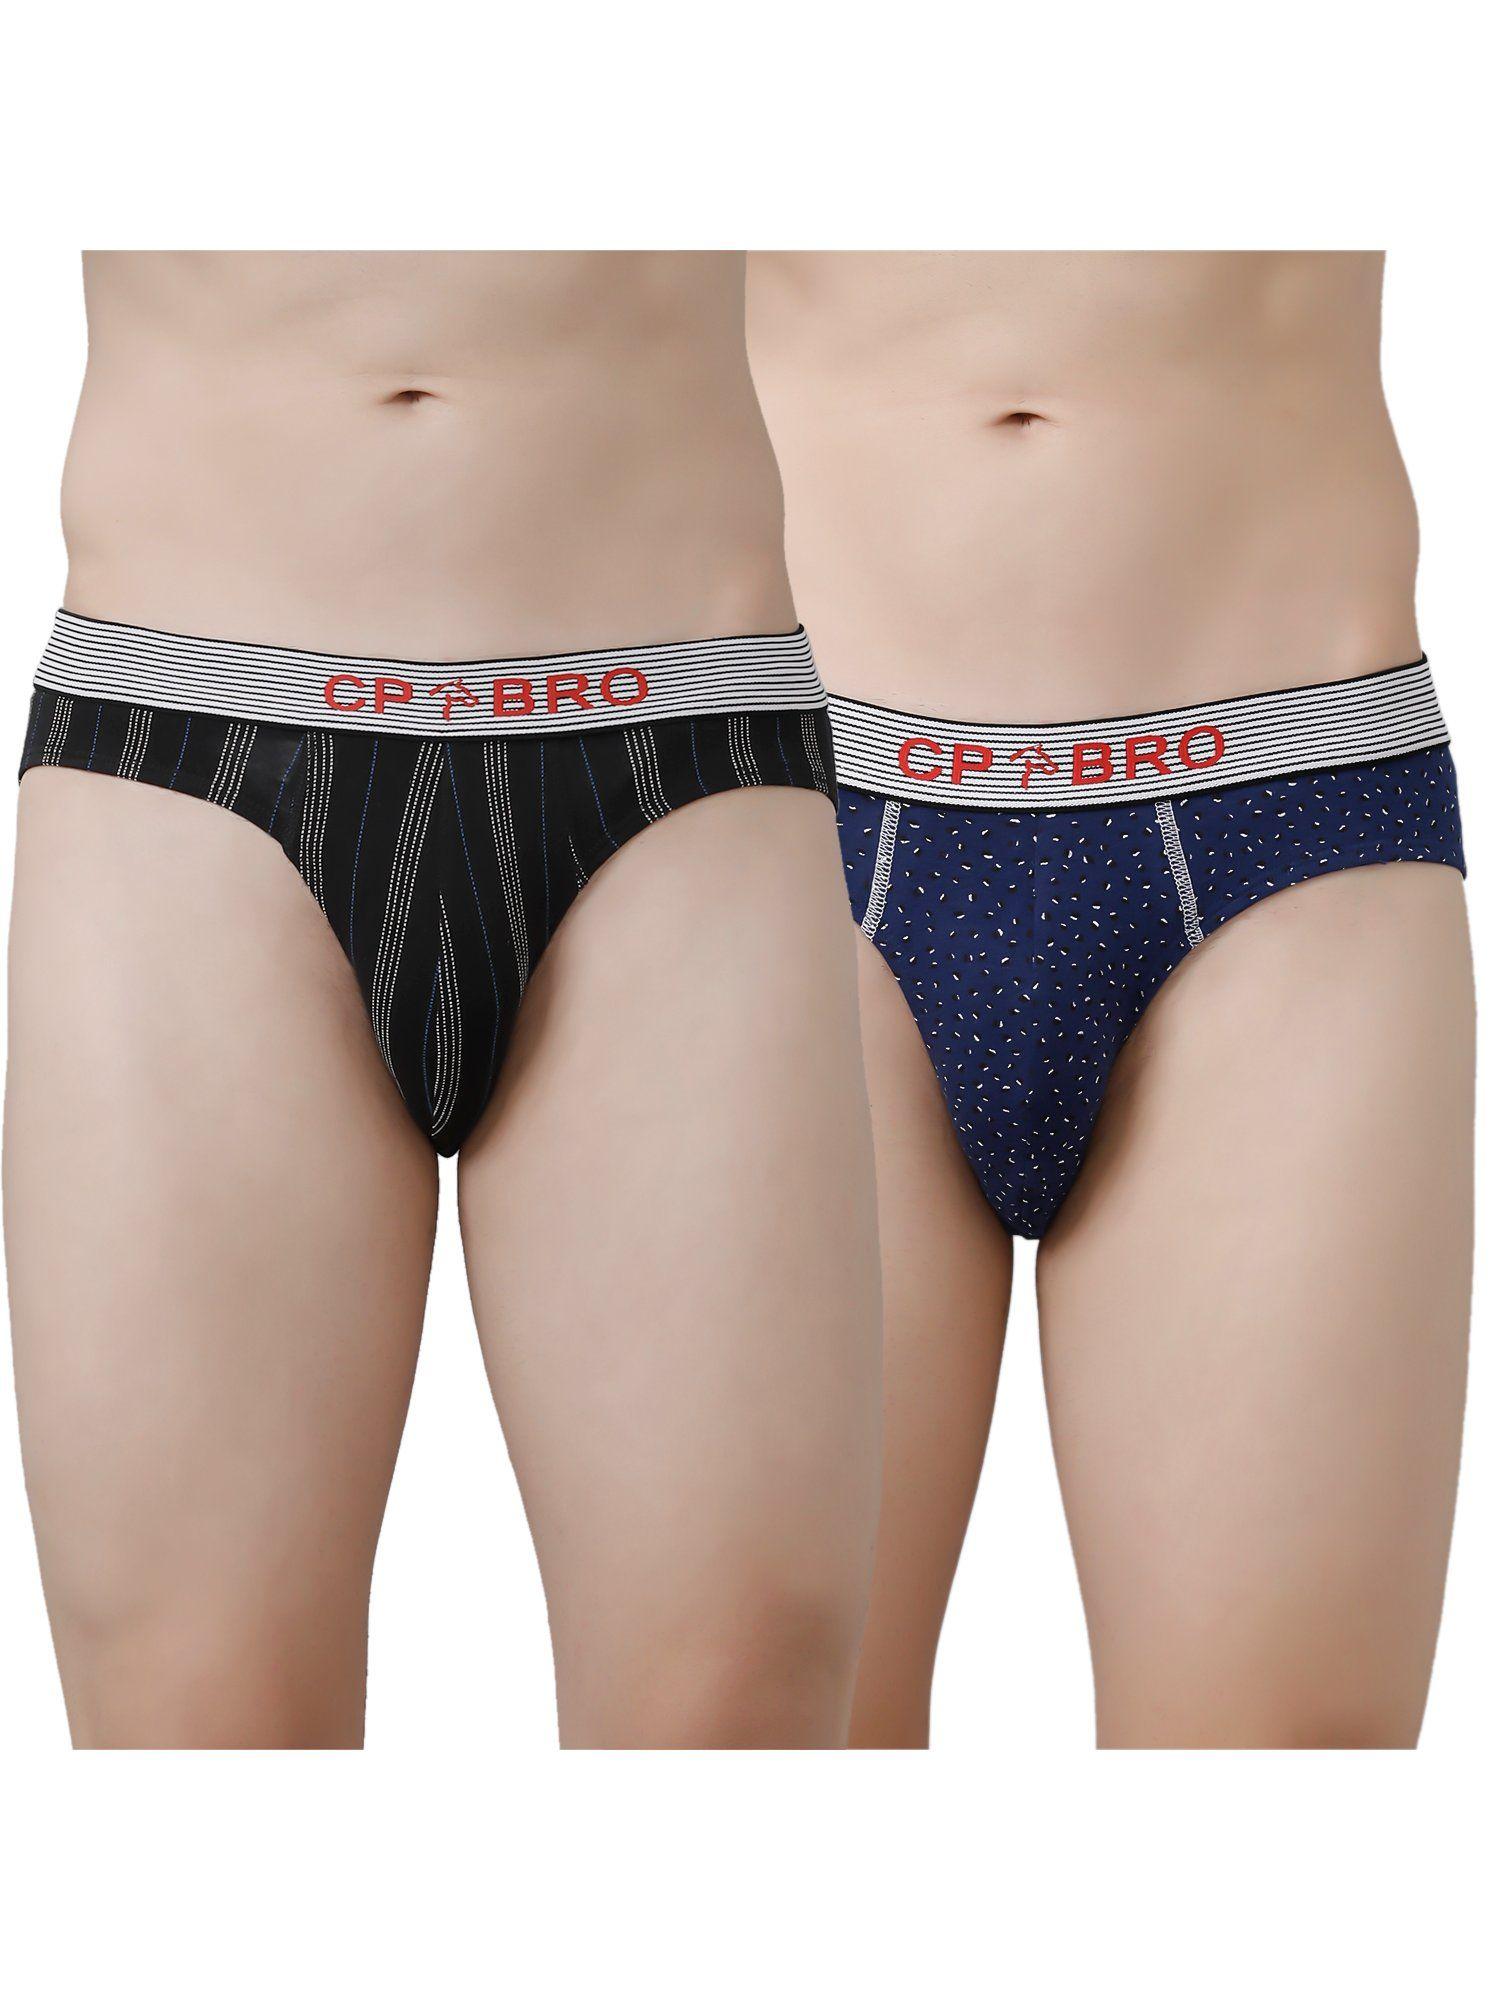 printed briefs with exposed waistband value - black stripe & navy dot (pack of 2)